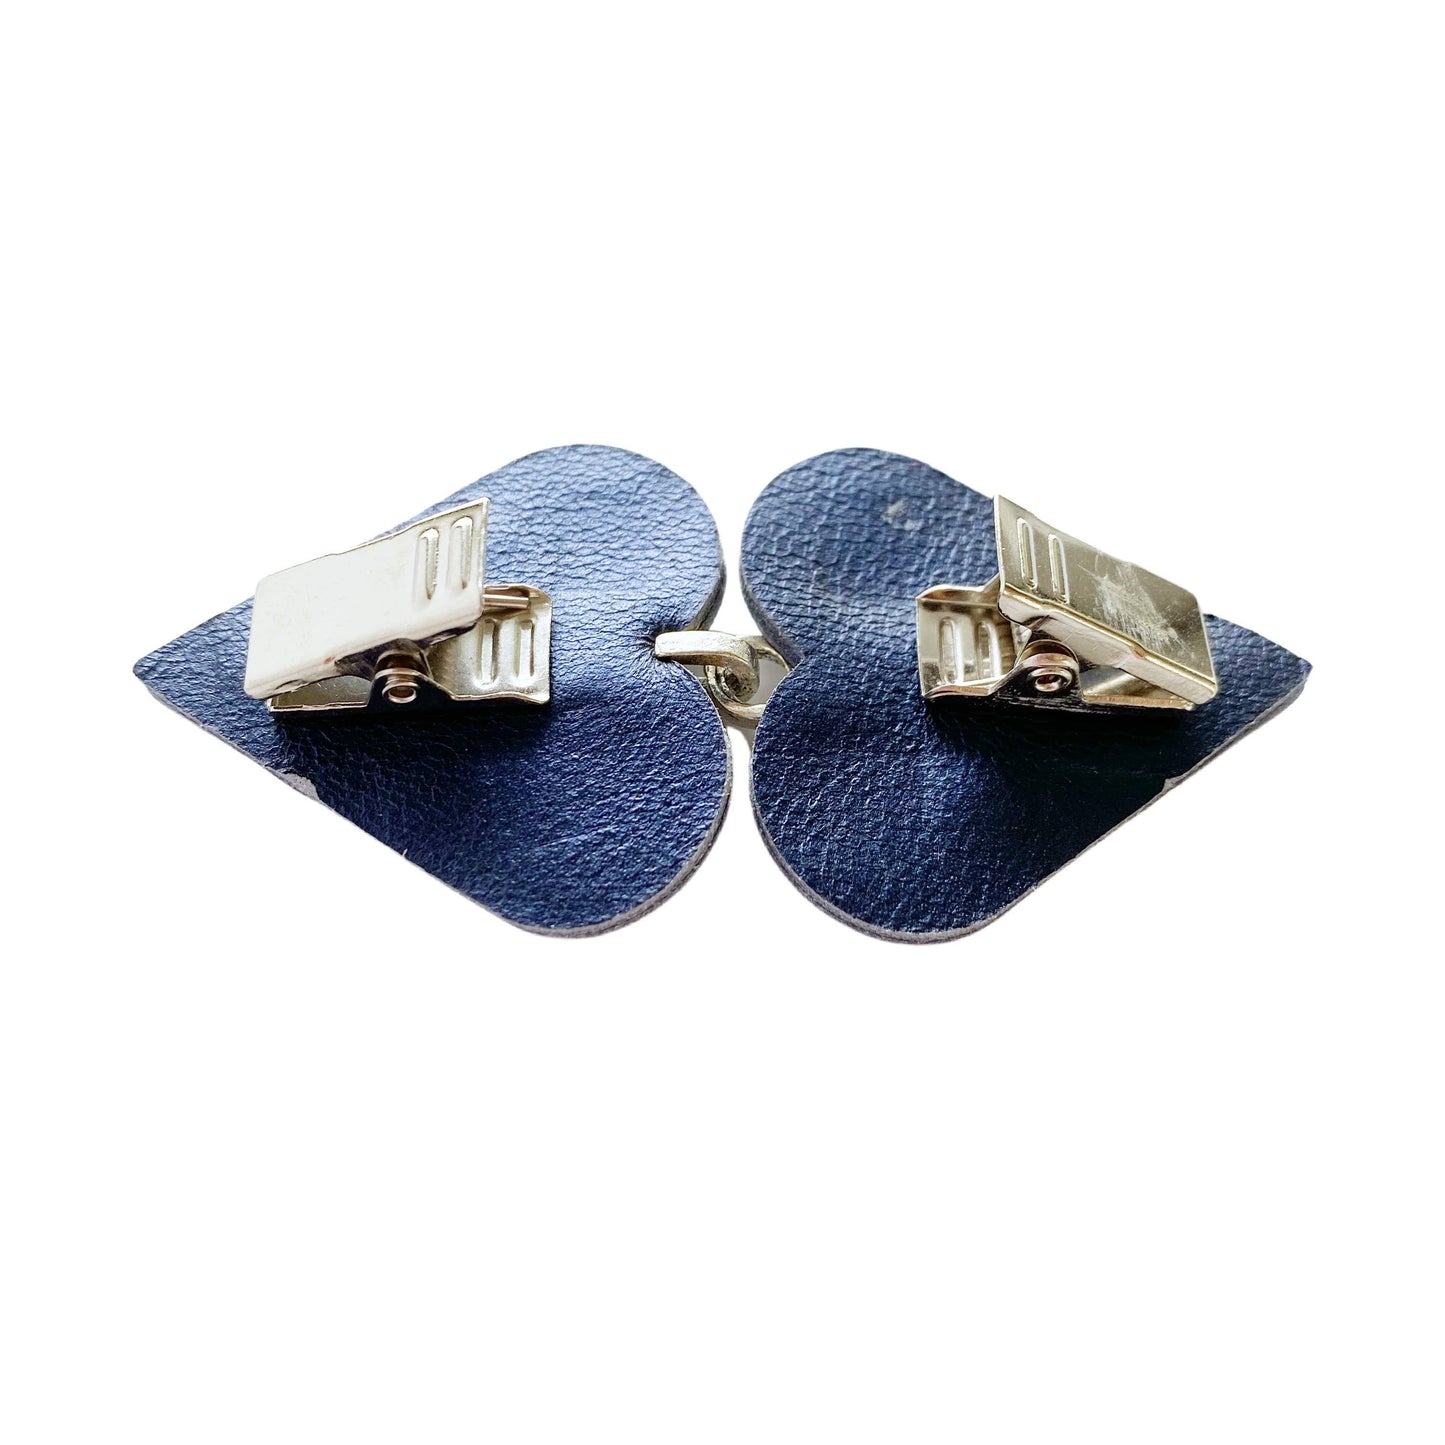 Cloak Clasp - Silver Leaf on Navy Blue Leather